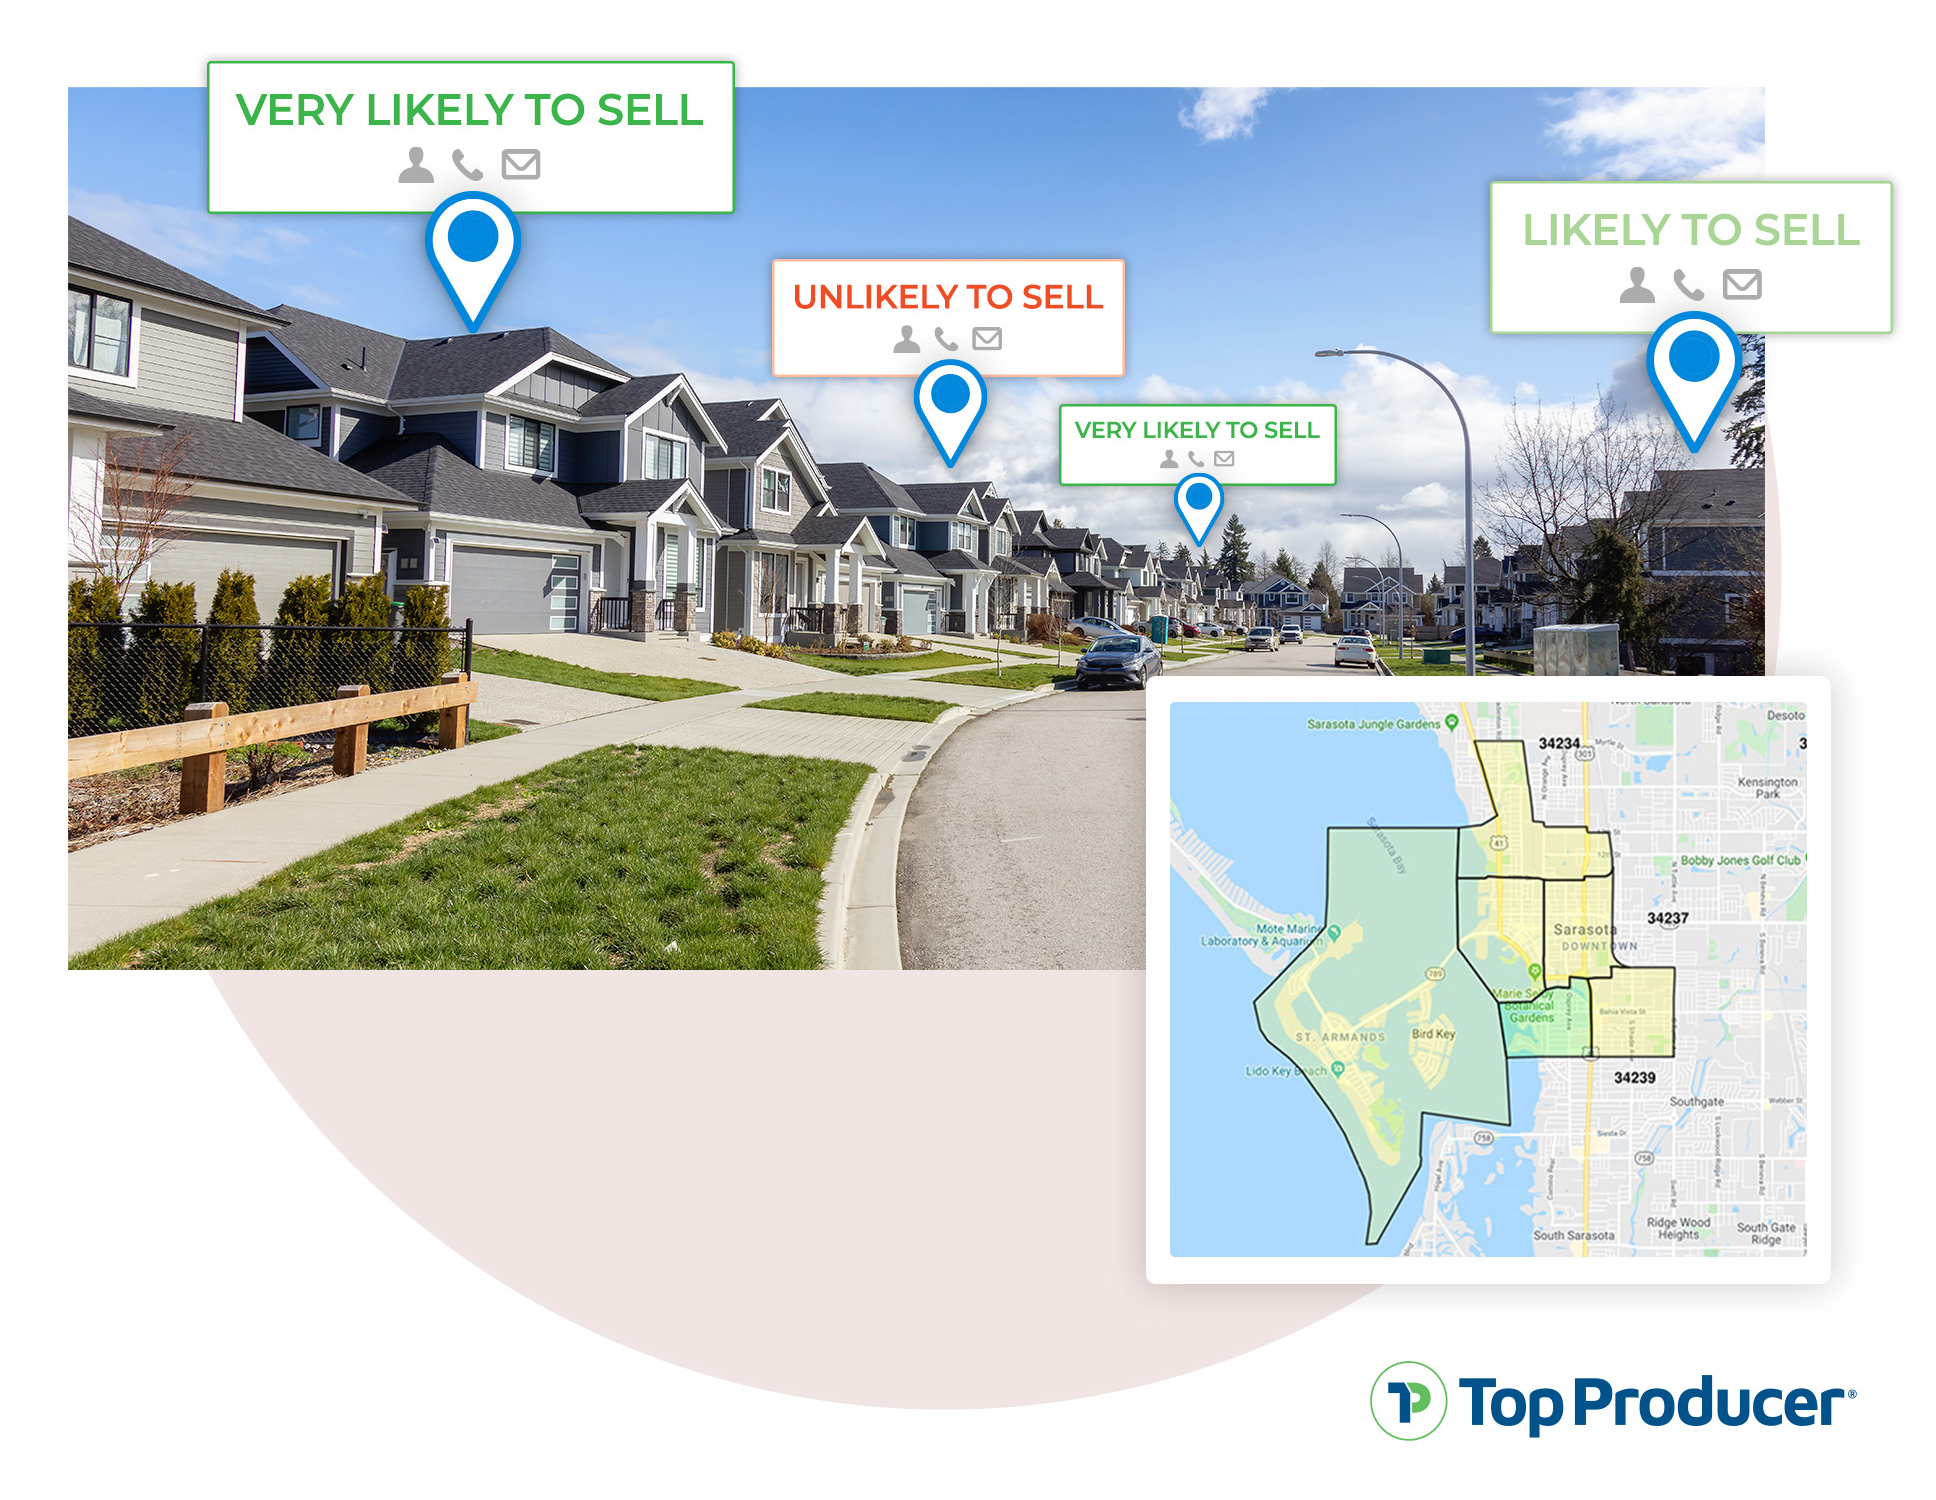 Smart Targeting uses AI & automated marketing to put real estate agents in front of their next seller